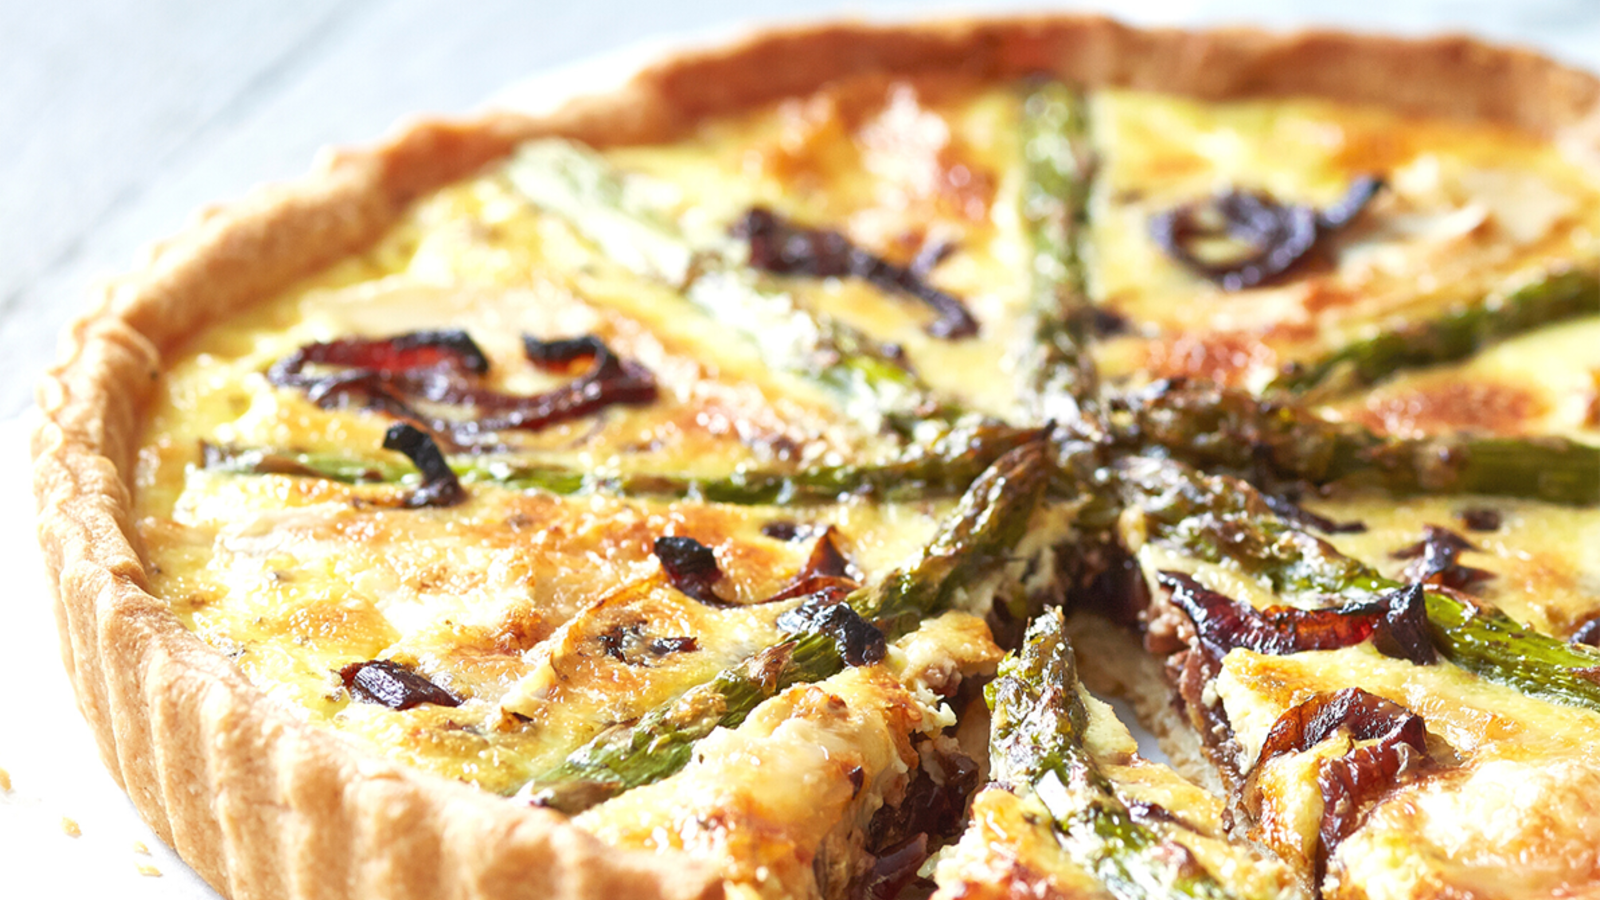 Image of Caramelized-onion and asparagus quiche